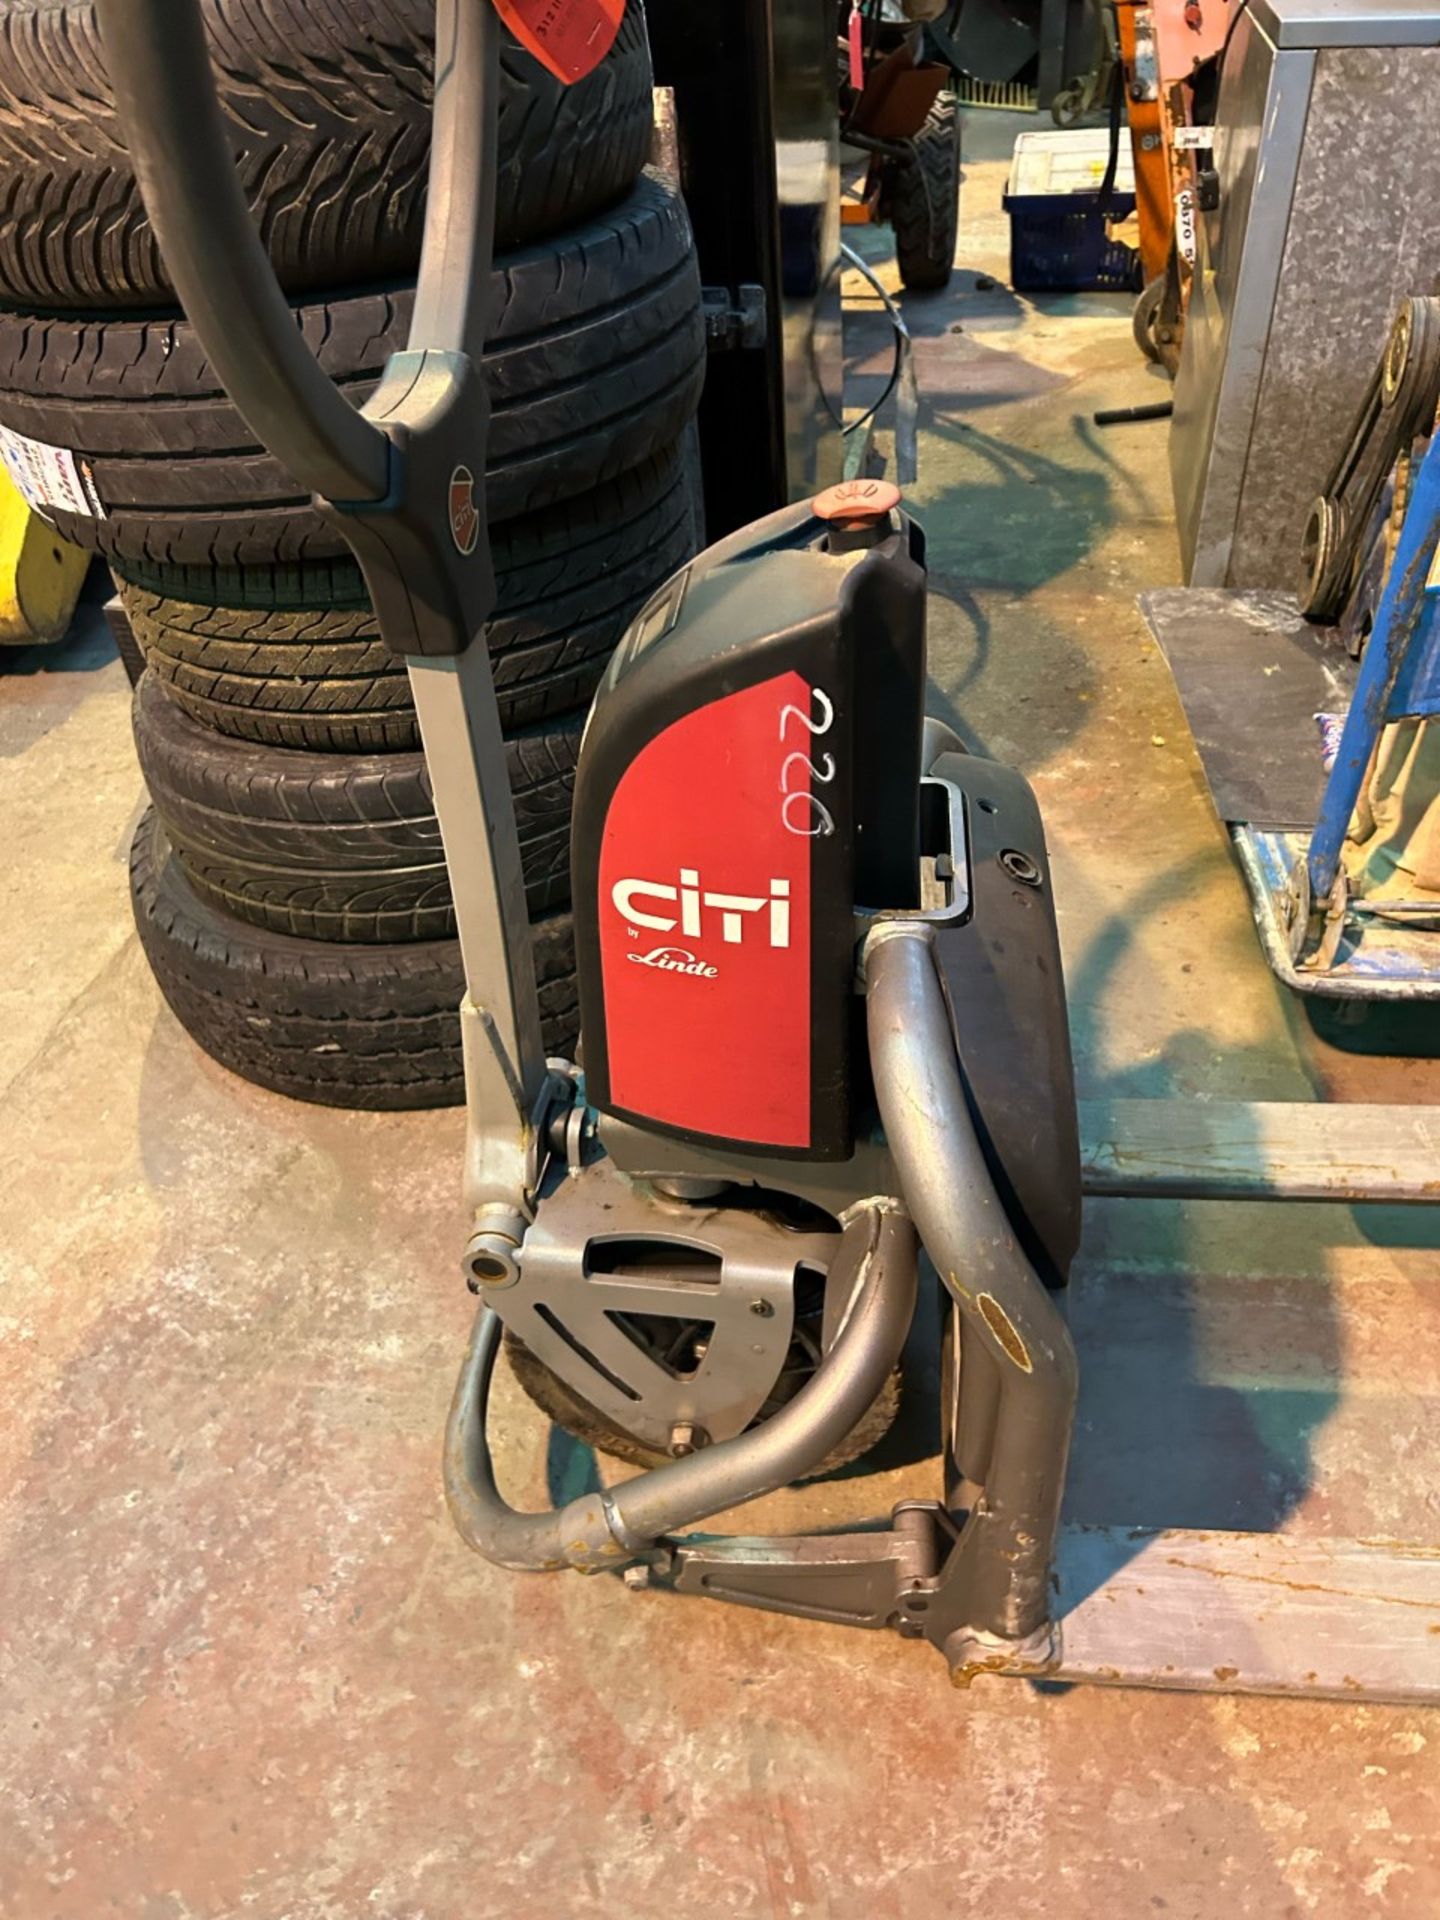 Linde citi battery powered pallet truck. Non runner - Image 3 of 4